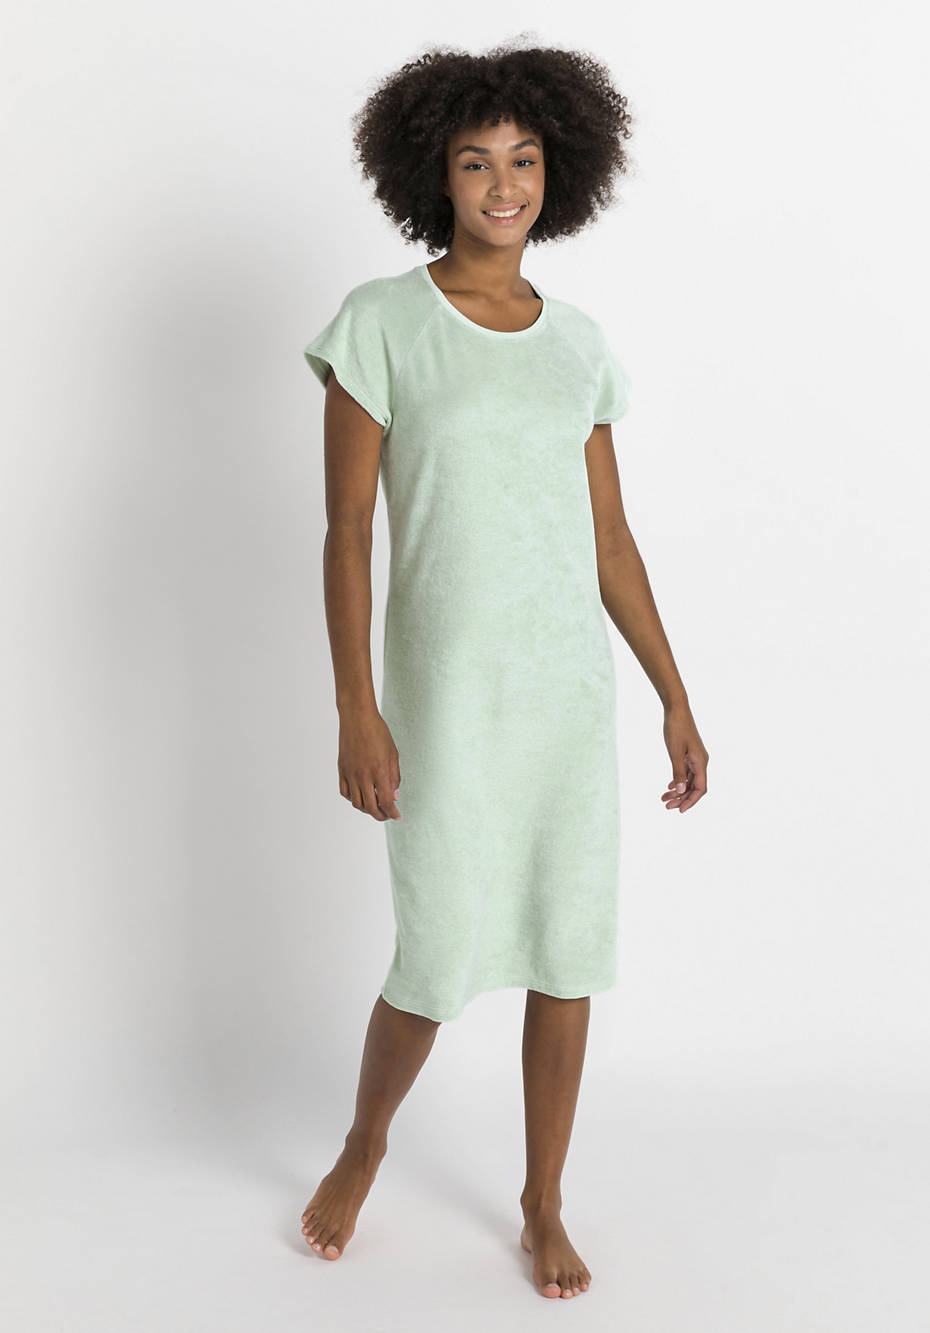 Terrycloth nightgown made from pure organic cotton